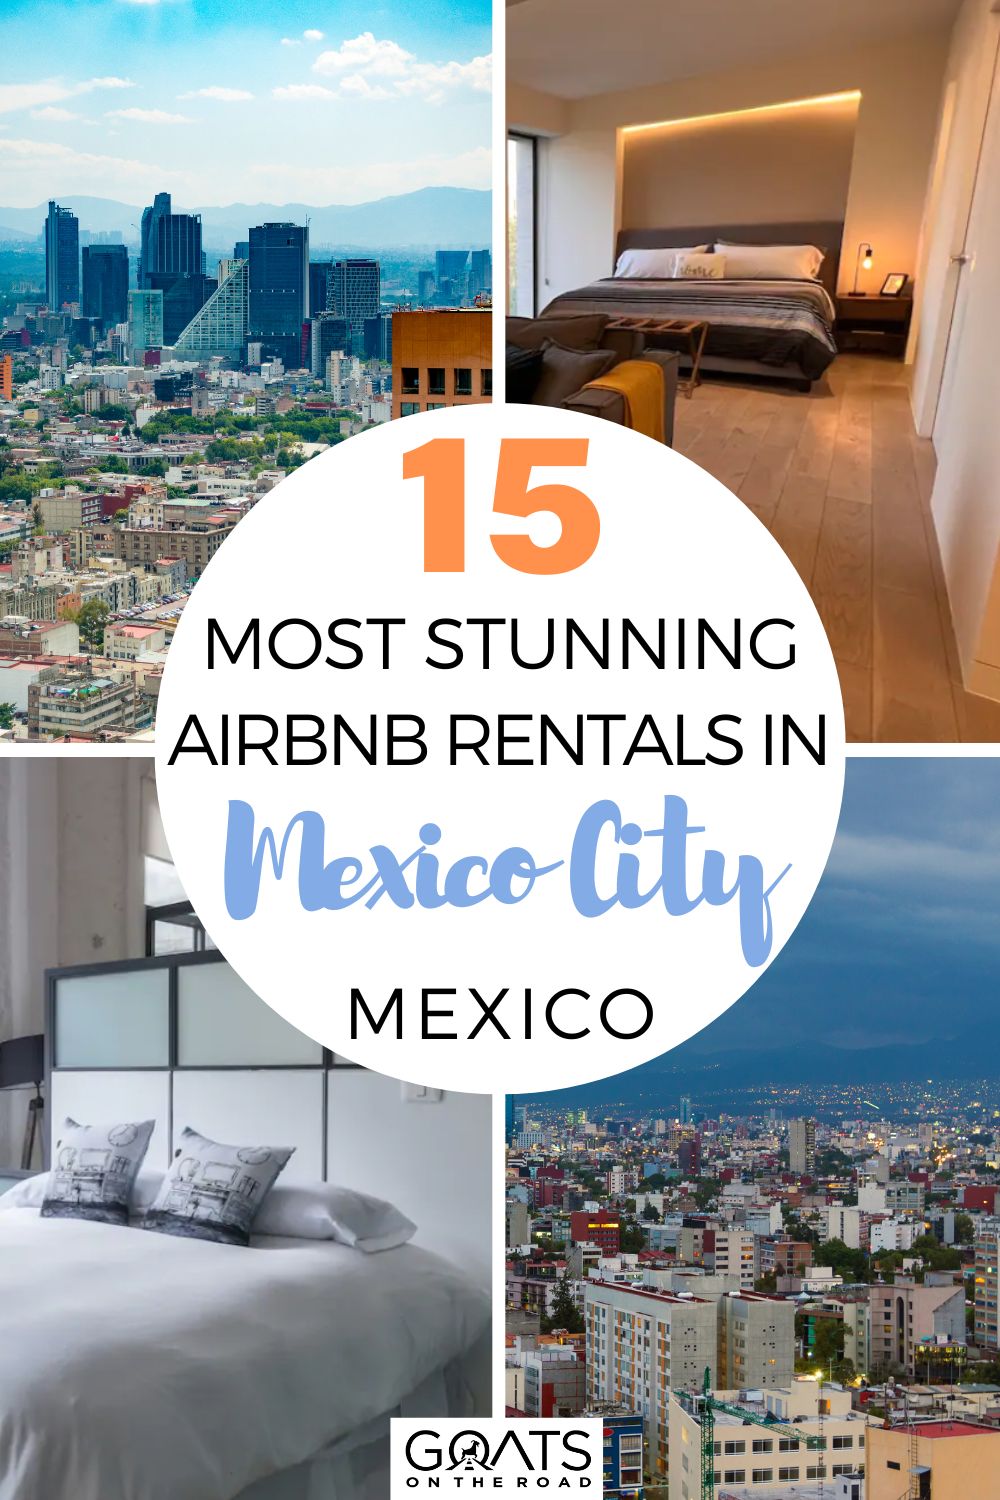 15 Most Stunning Airbnb Rentals in Mexico City, Mexico